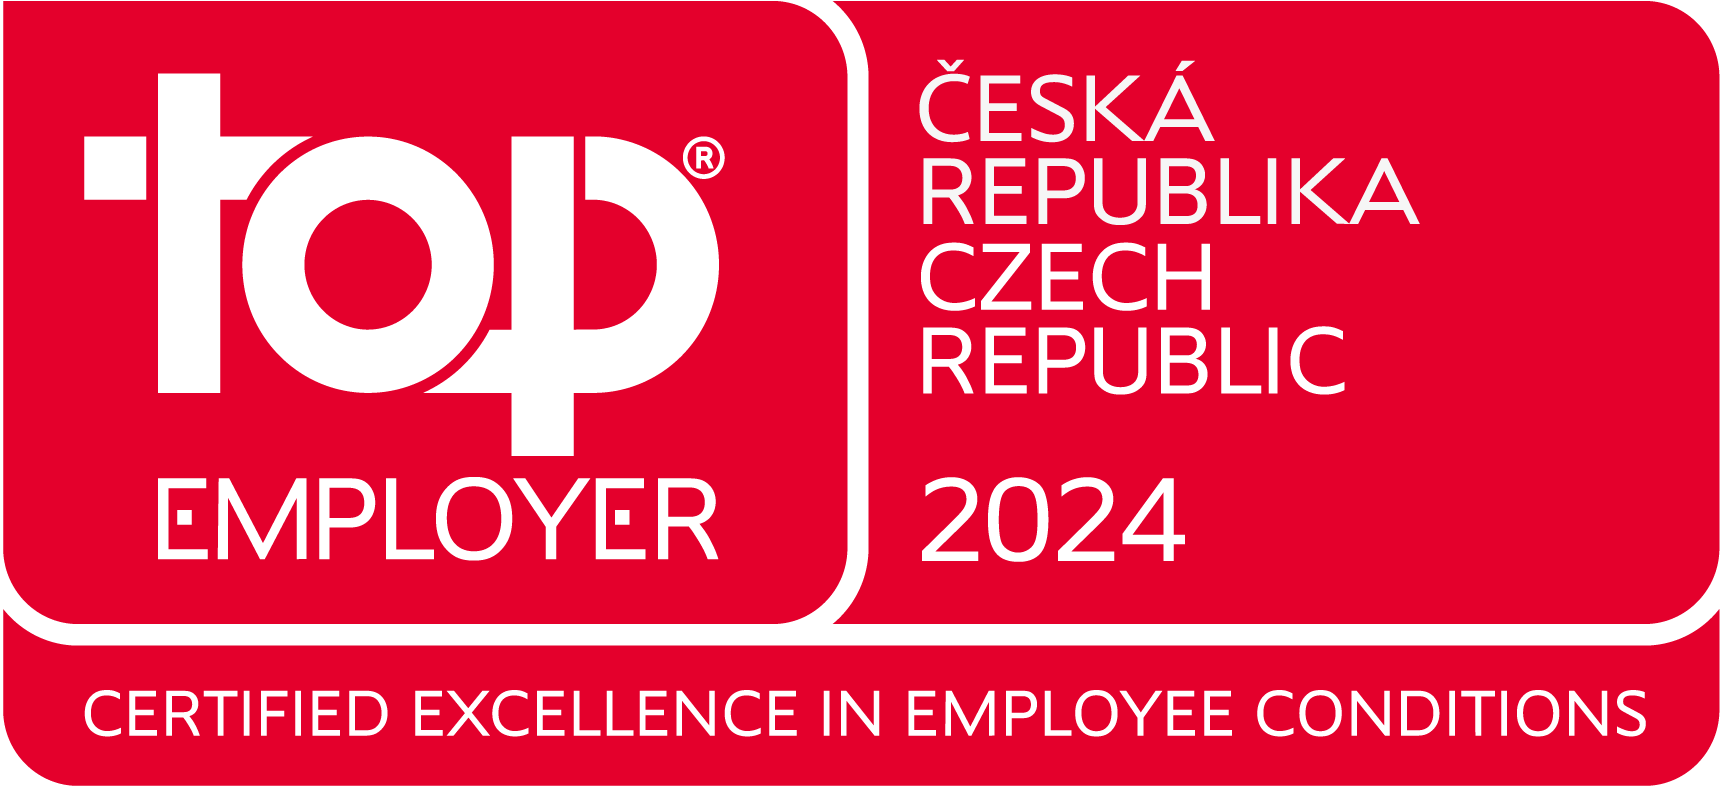 We are a Top Employer!